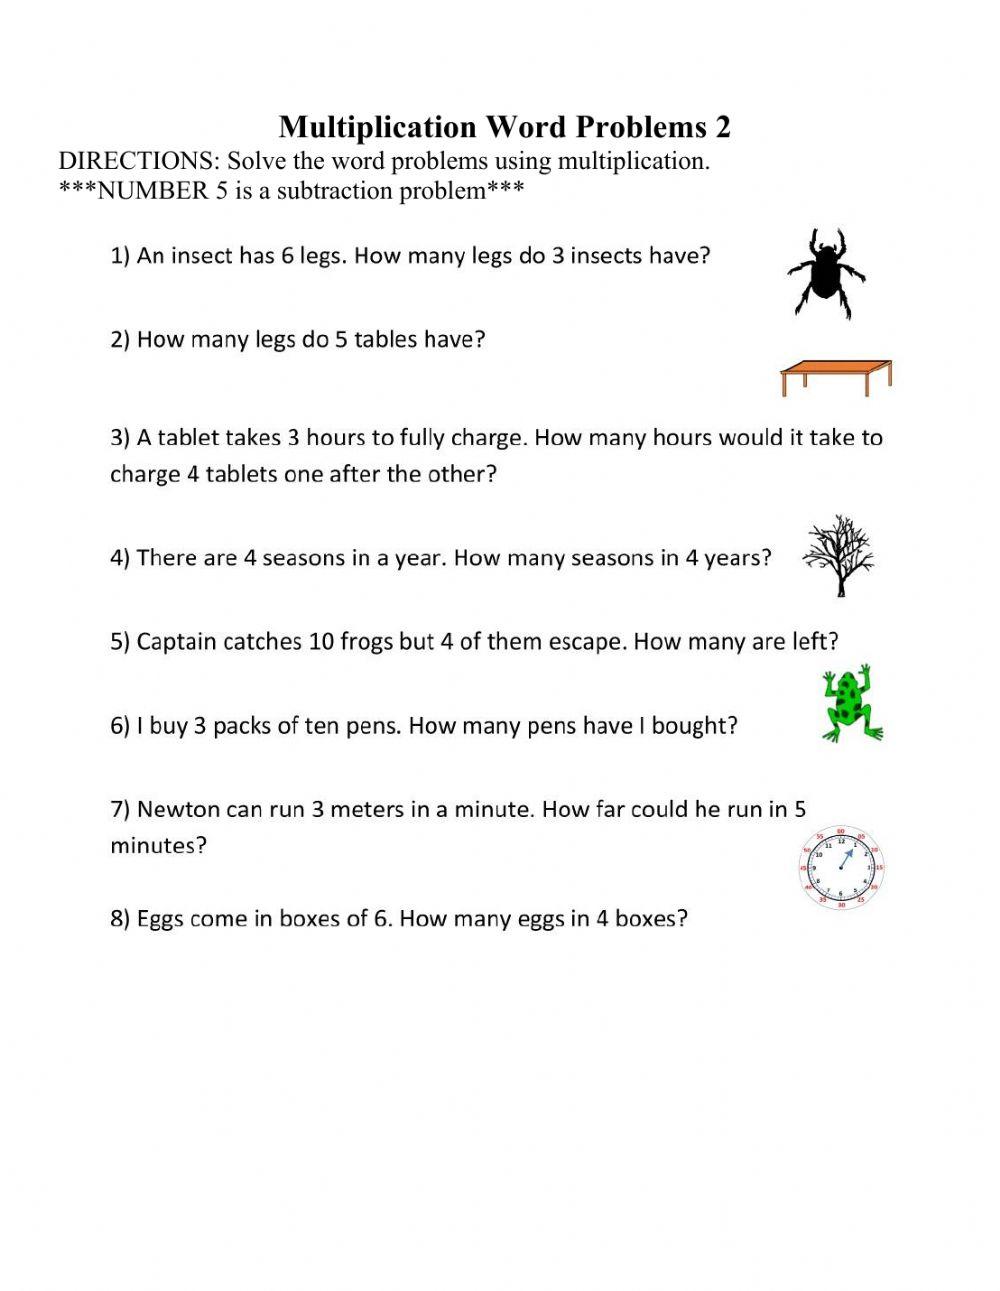 MA2-Monday (Multiplication Word Problems 2)